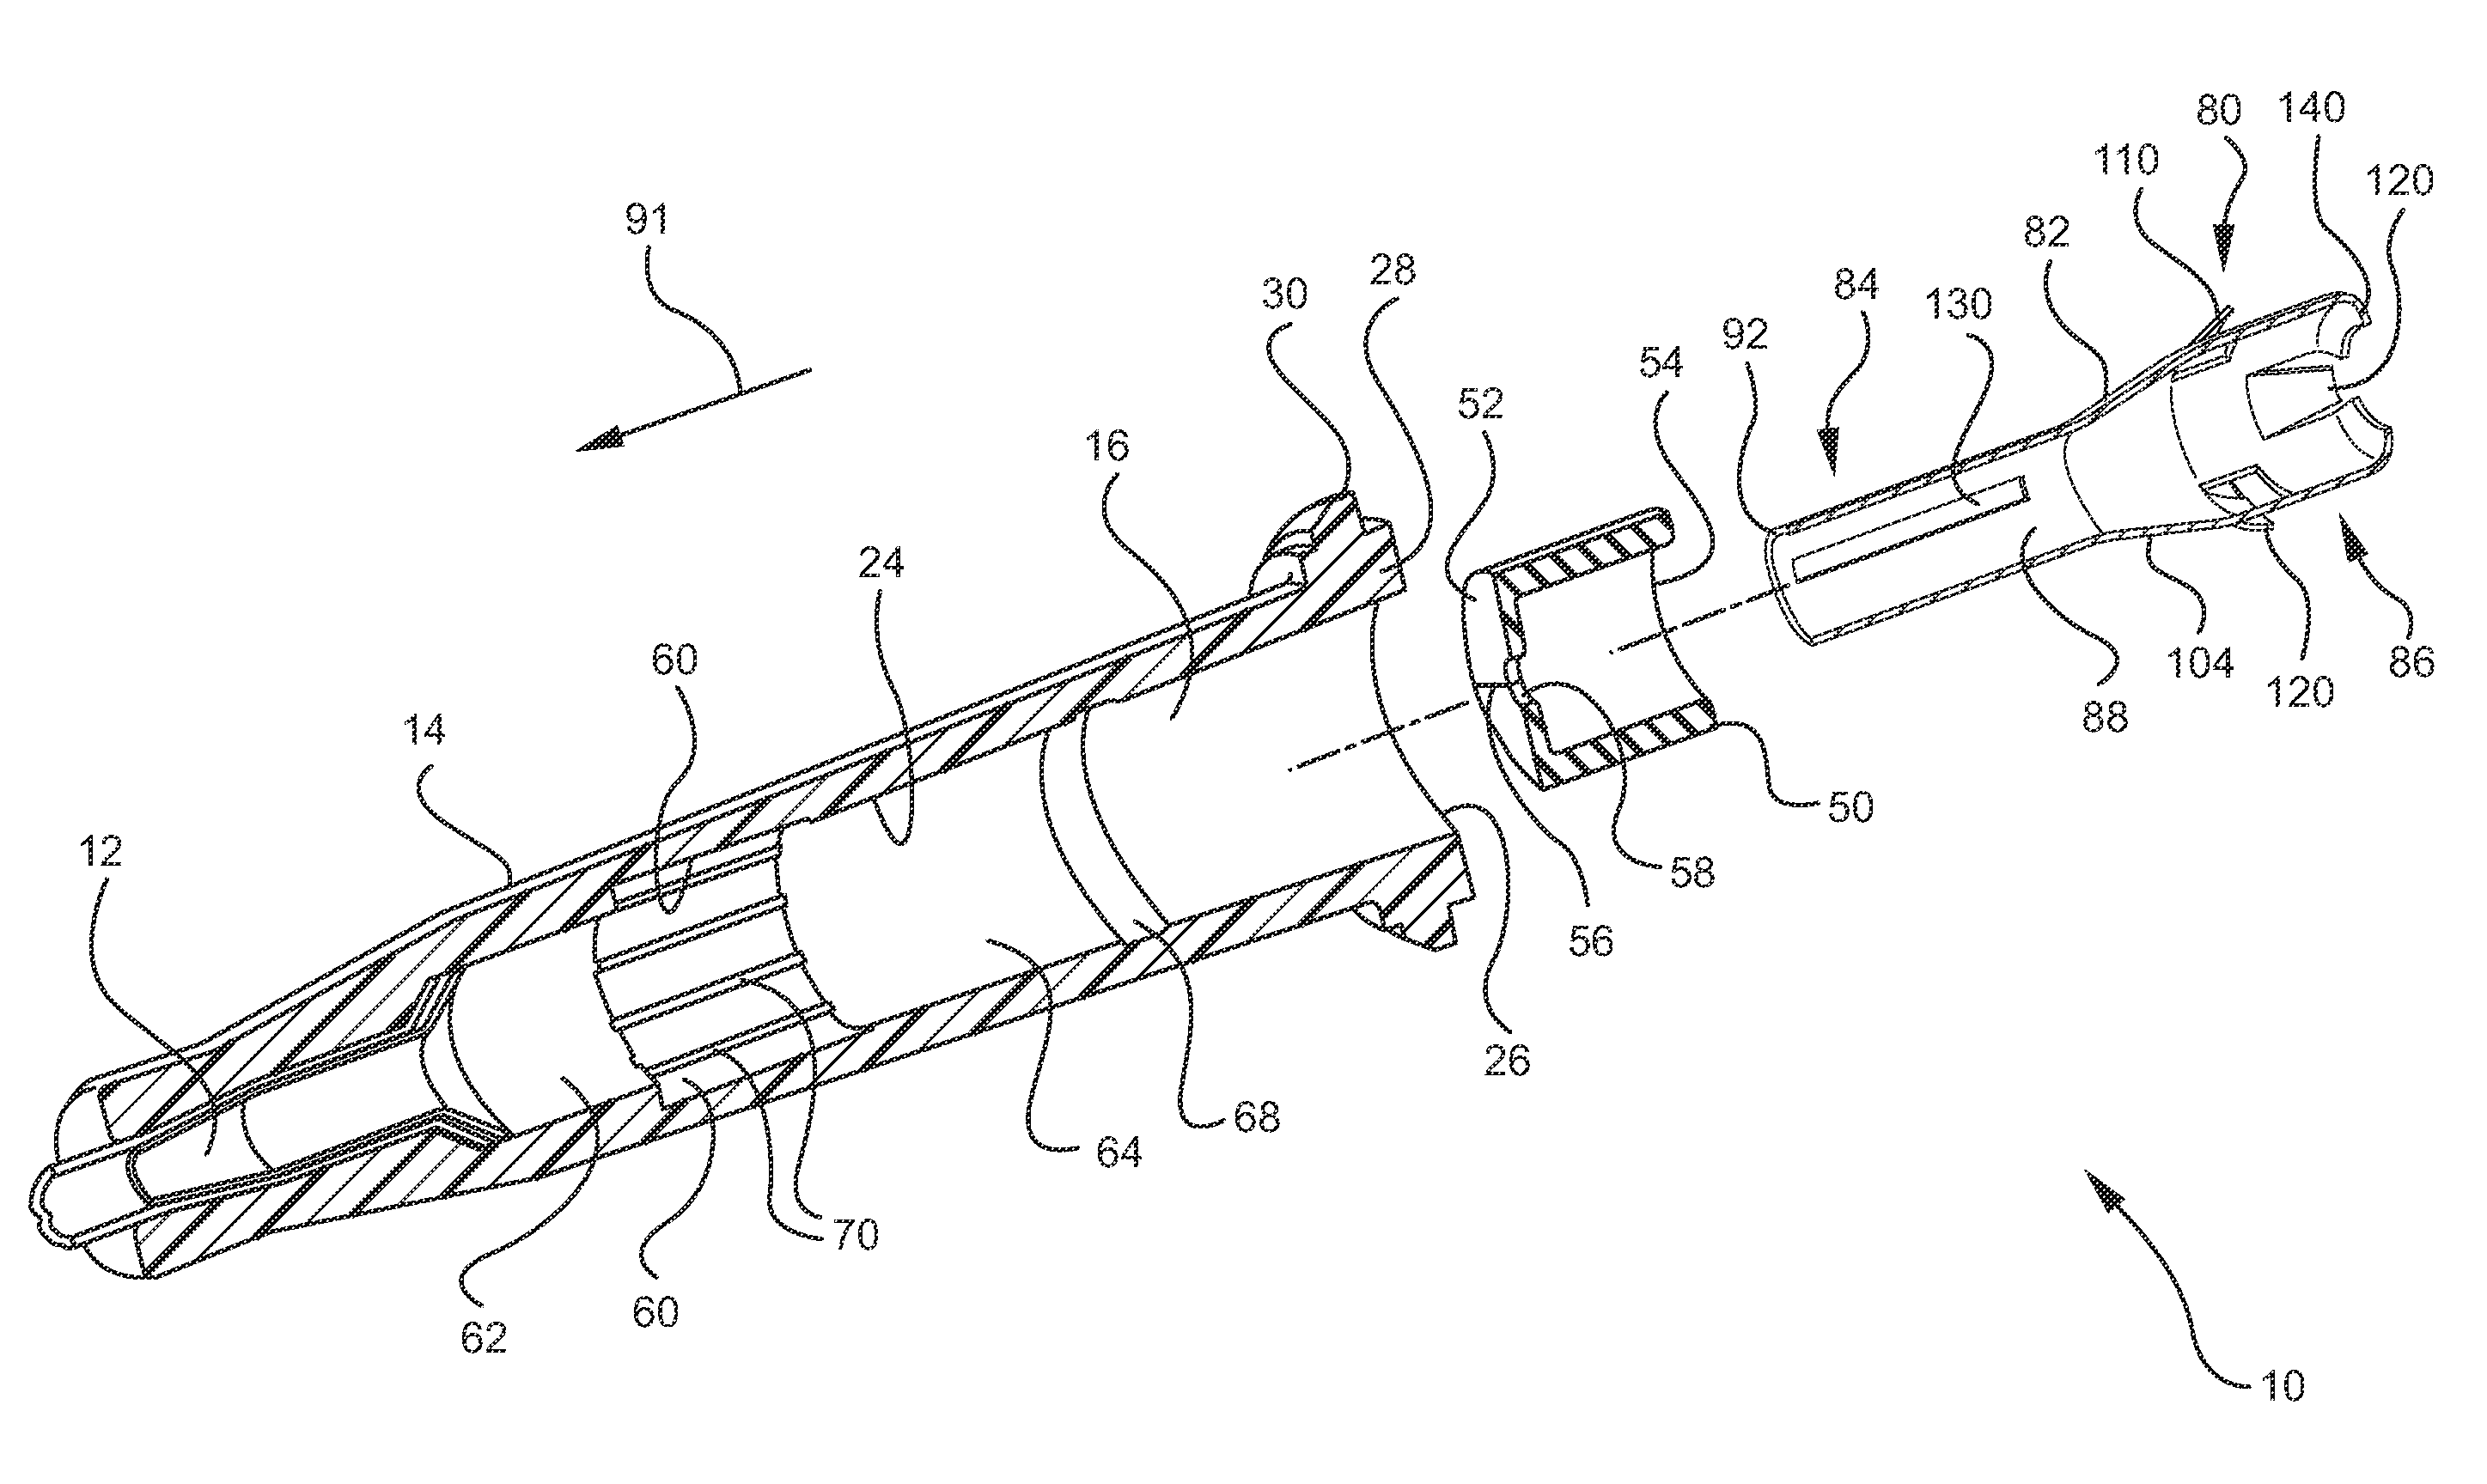 Systems and methods for providing a flushable catheter assembly